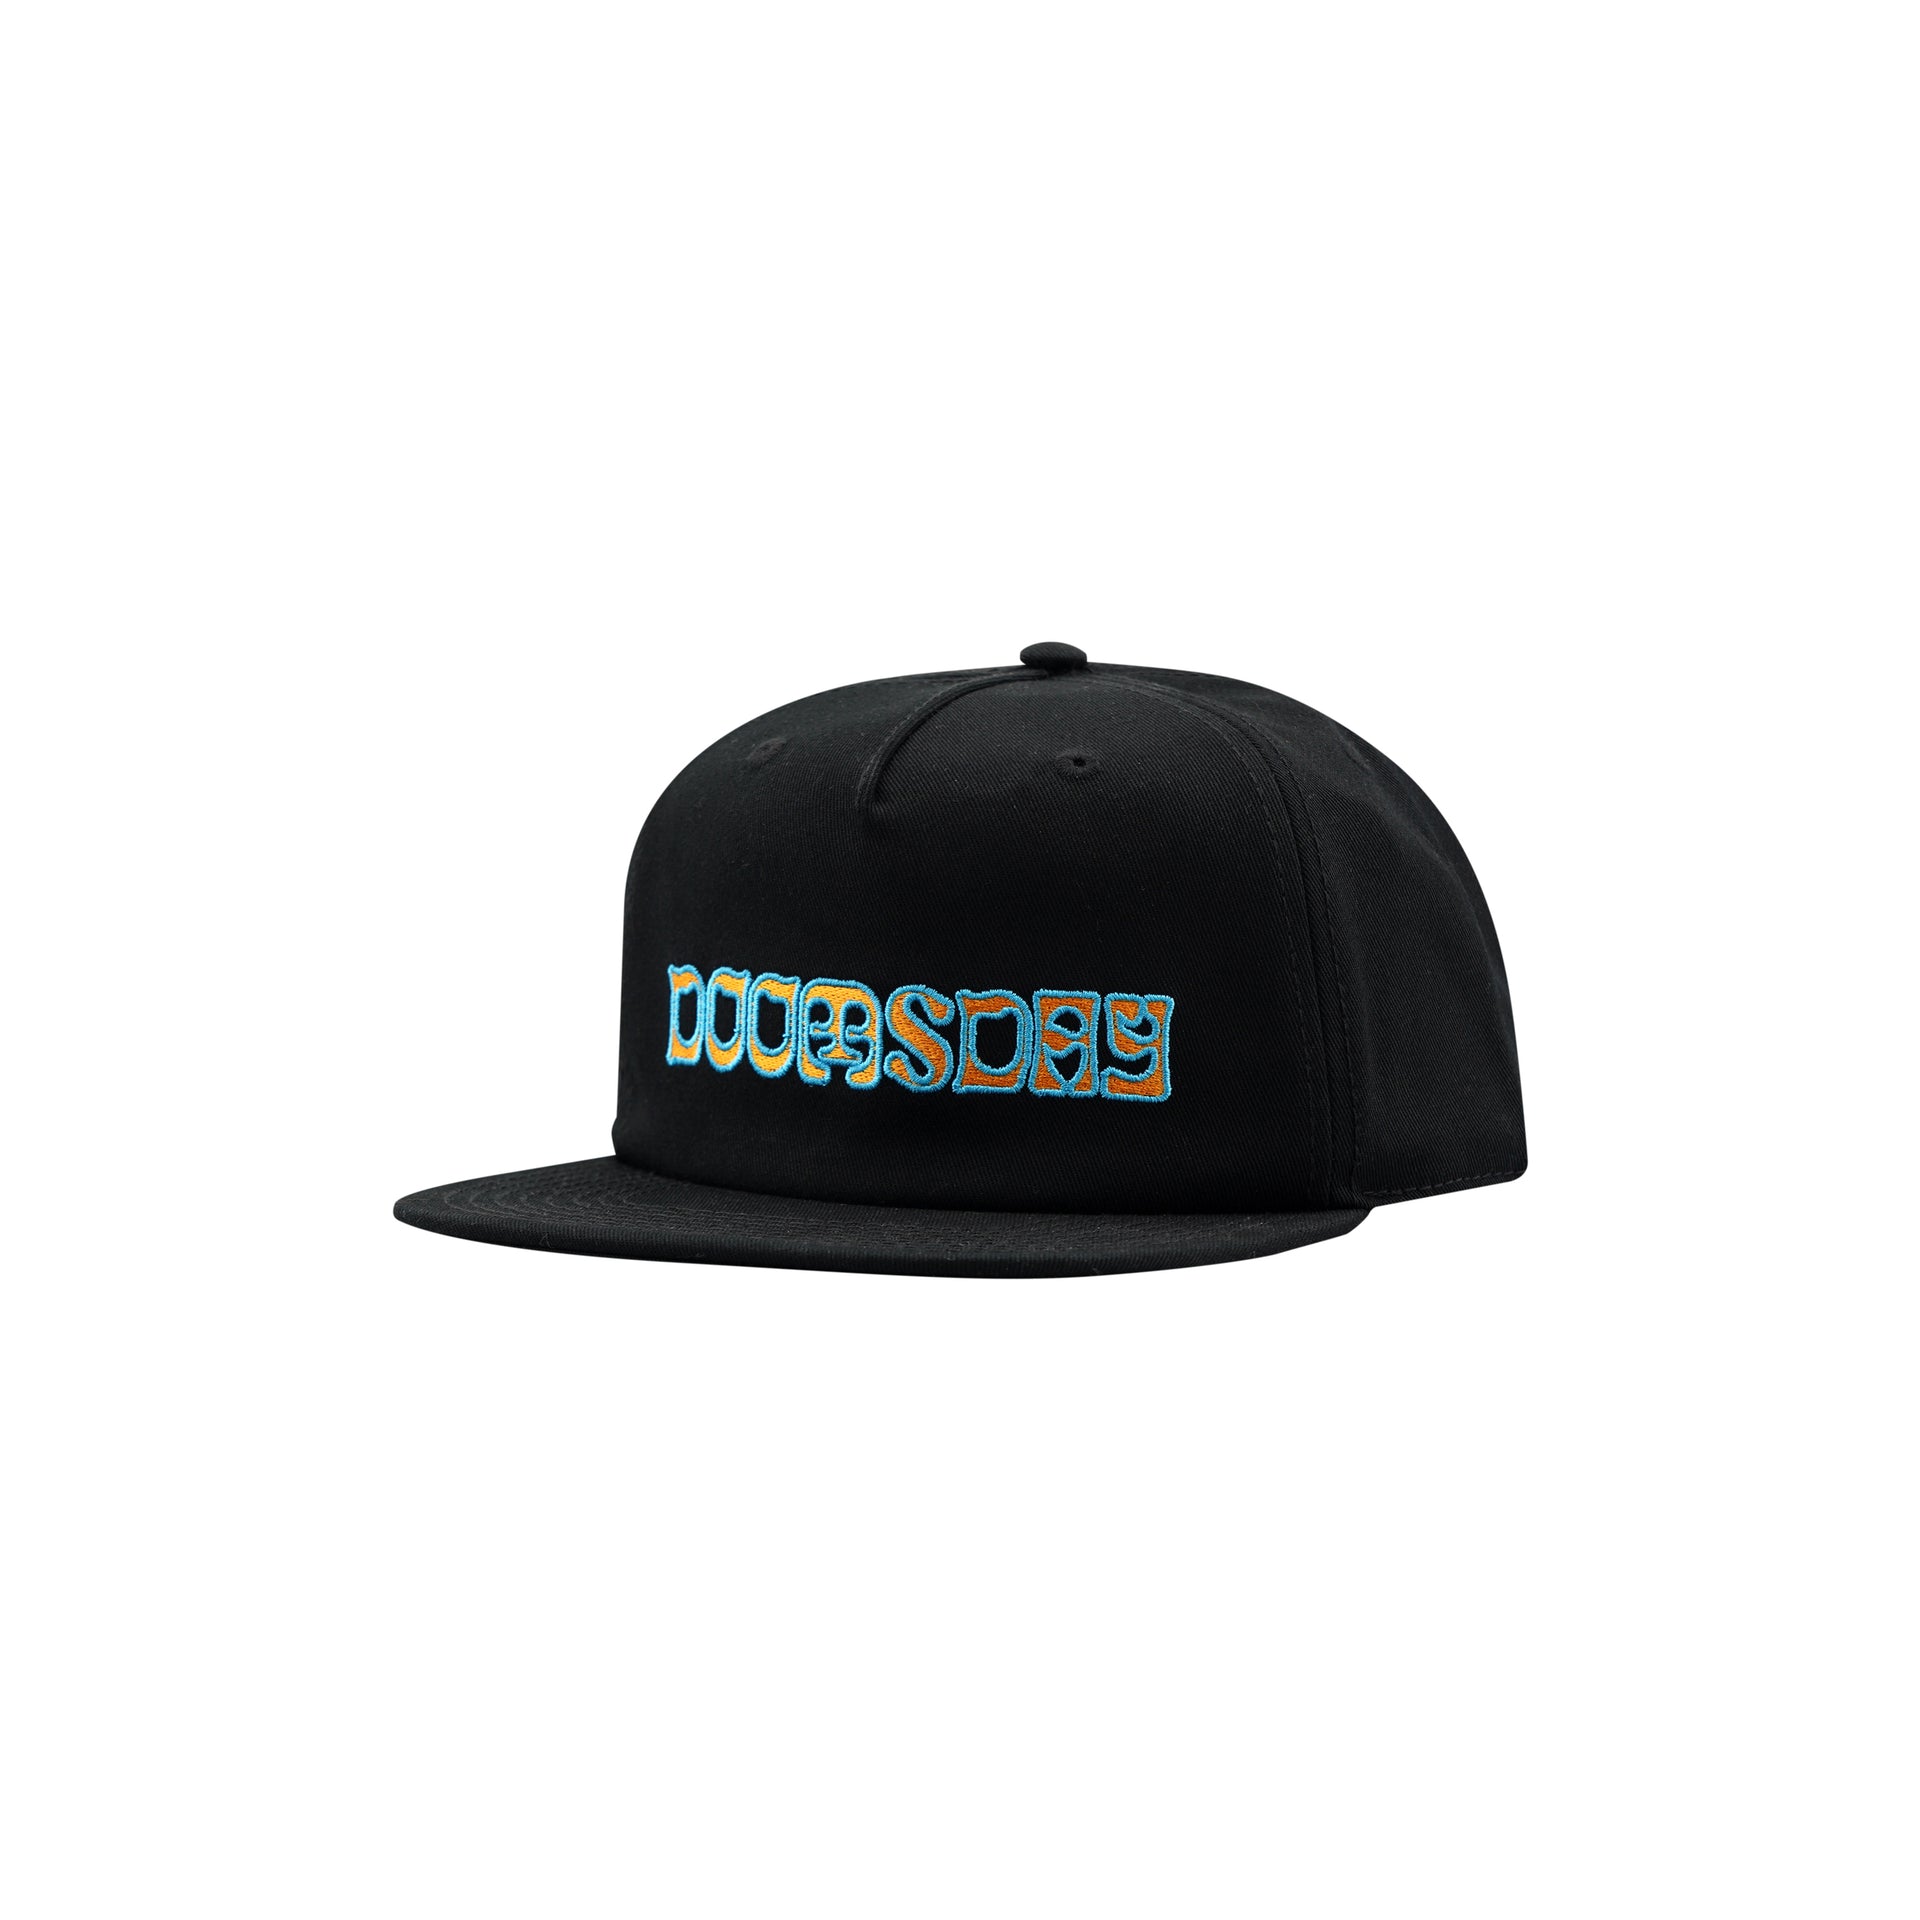 TRIPPY UNSTRUCTURED SNAPBACK